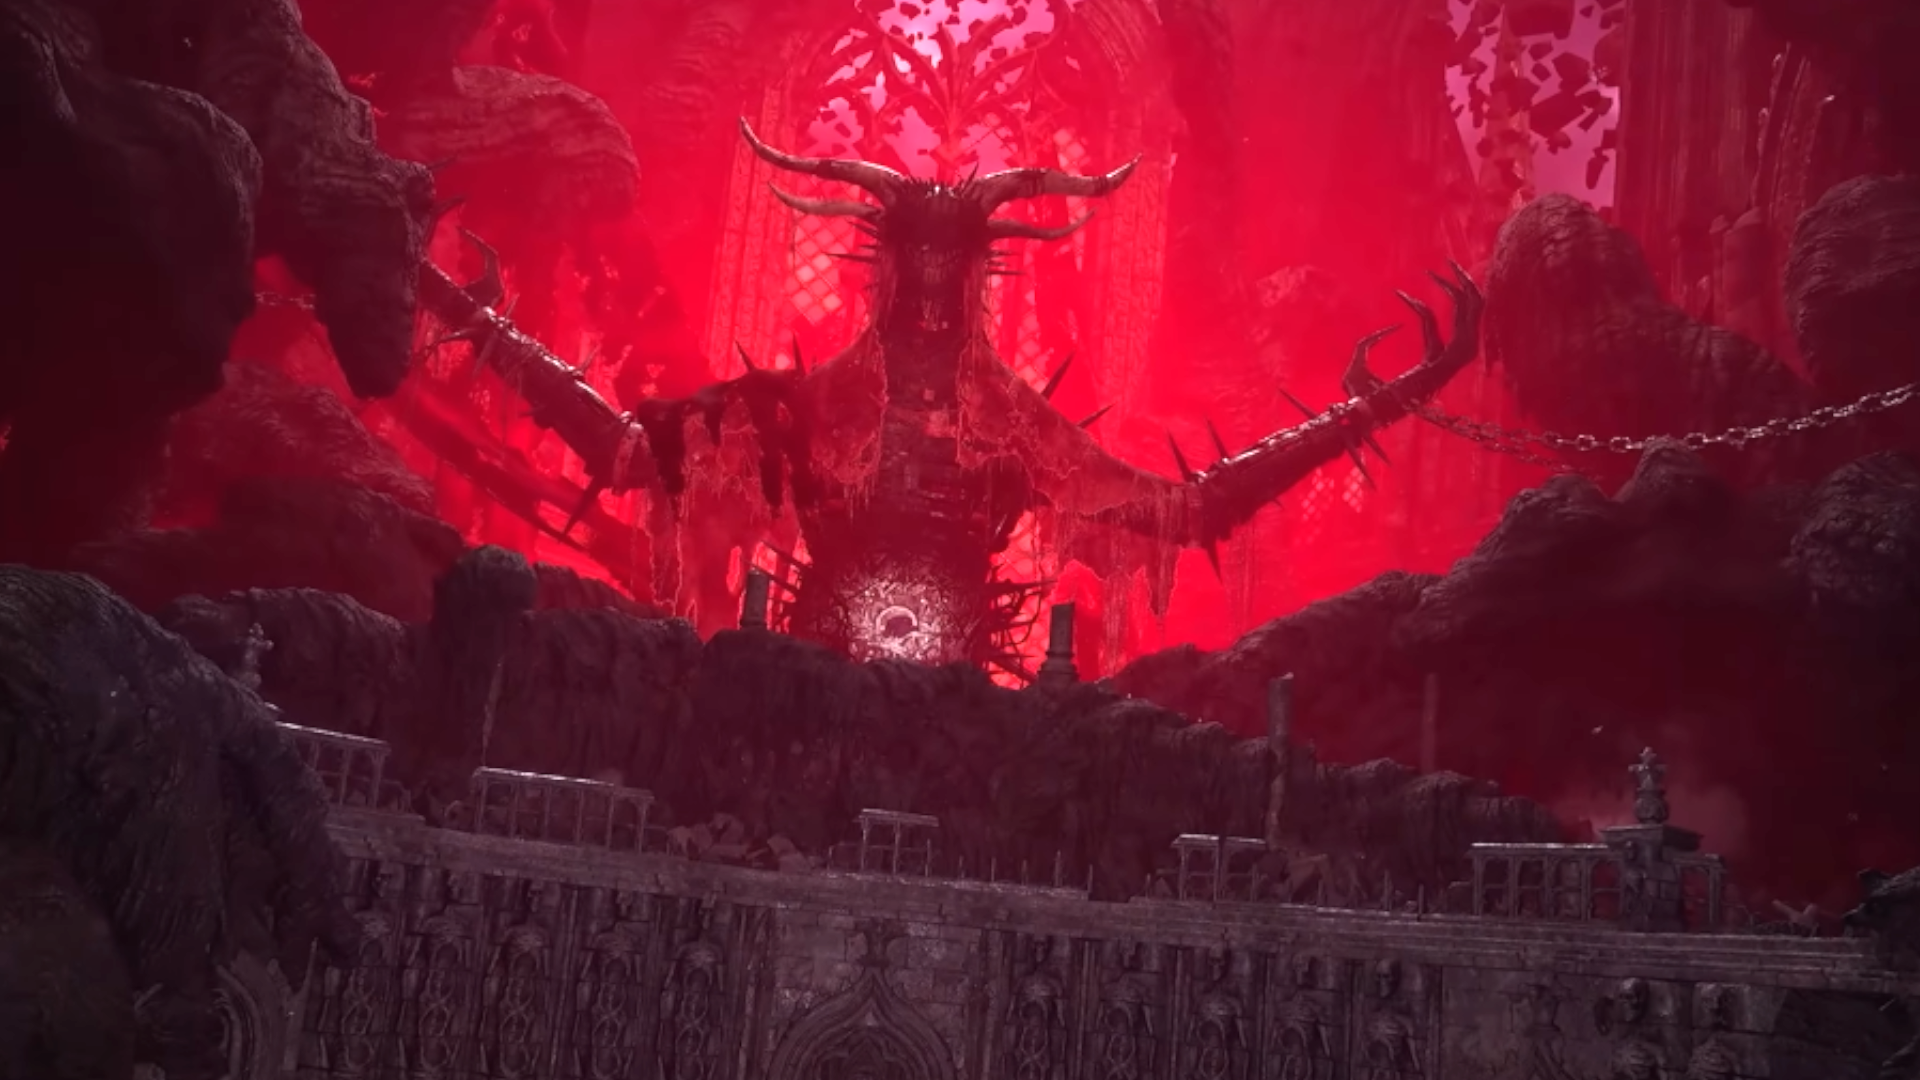 Everything we know about Lords of the Fallen: Story, trailers and more